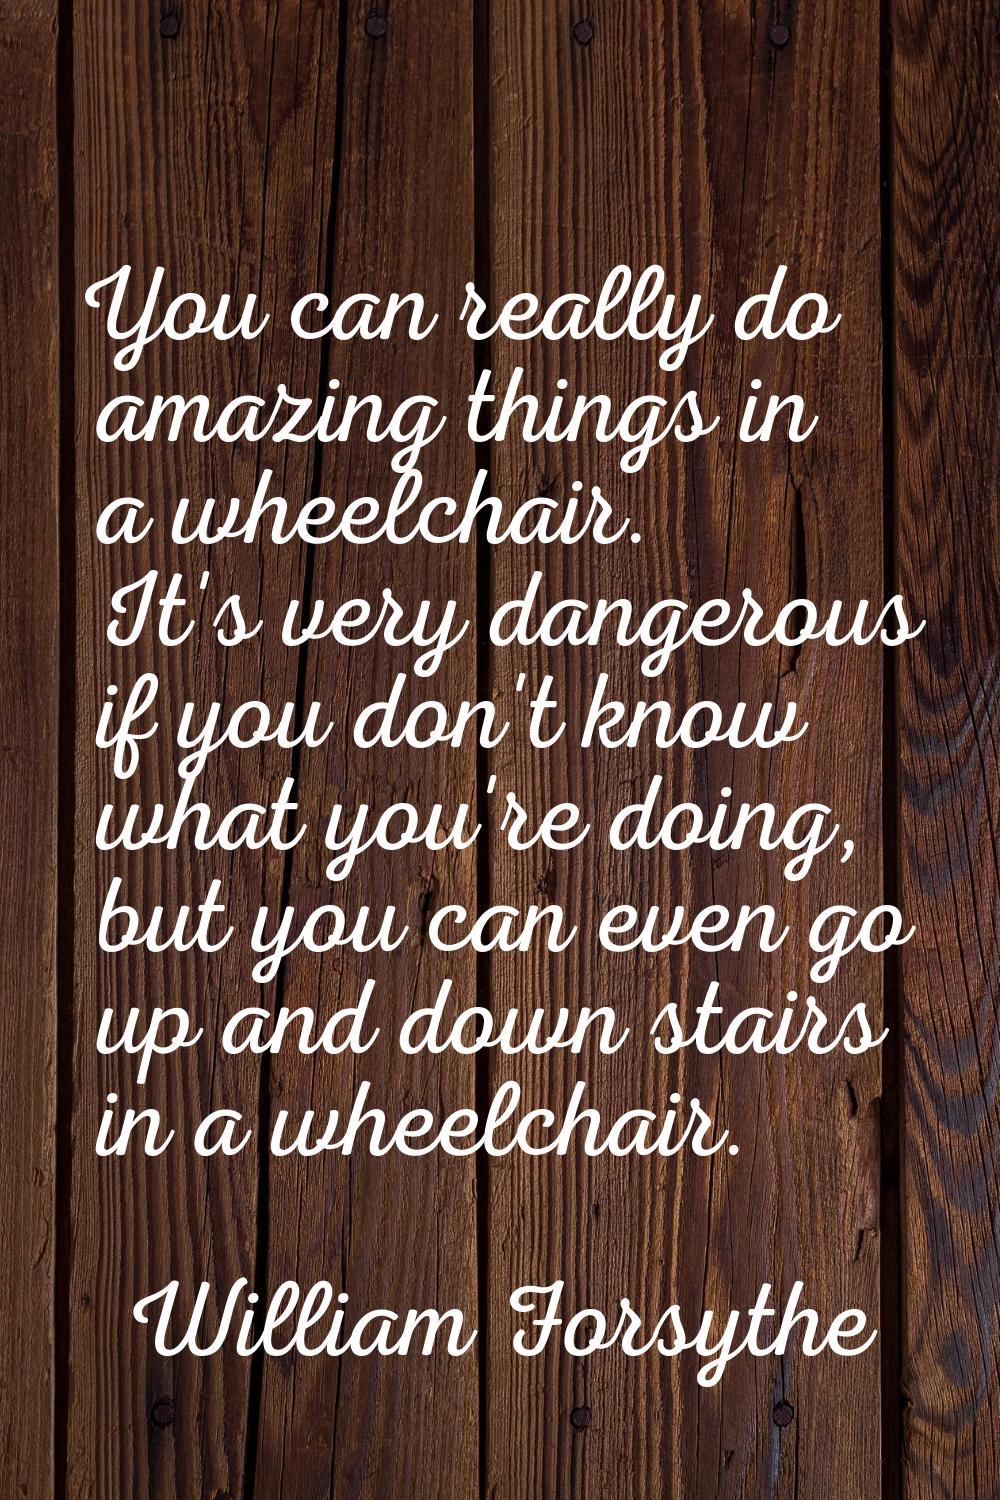 You can really do amazing things in a wheelchair. It's very dangerous if you don't know what you're